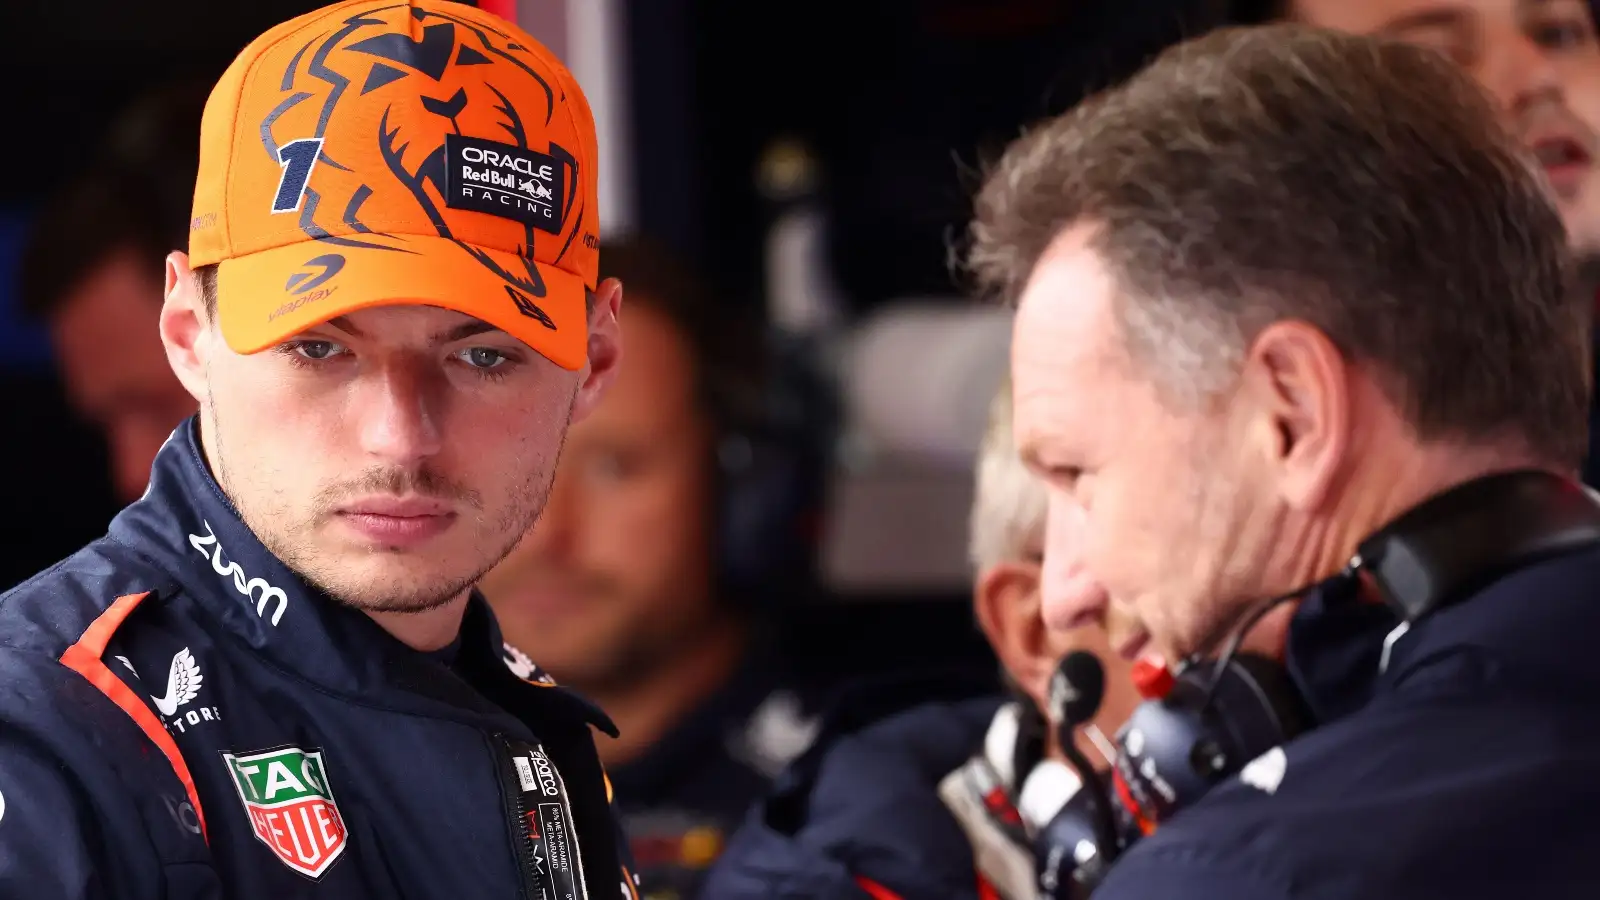 Max Verstappen hits back at 'pretty s***' Mercedes as war of words continues  : PlanetF1